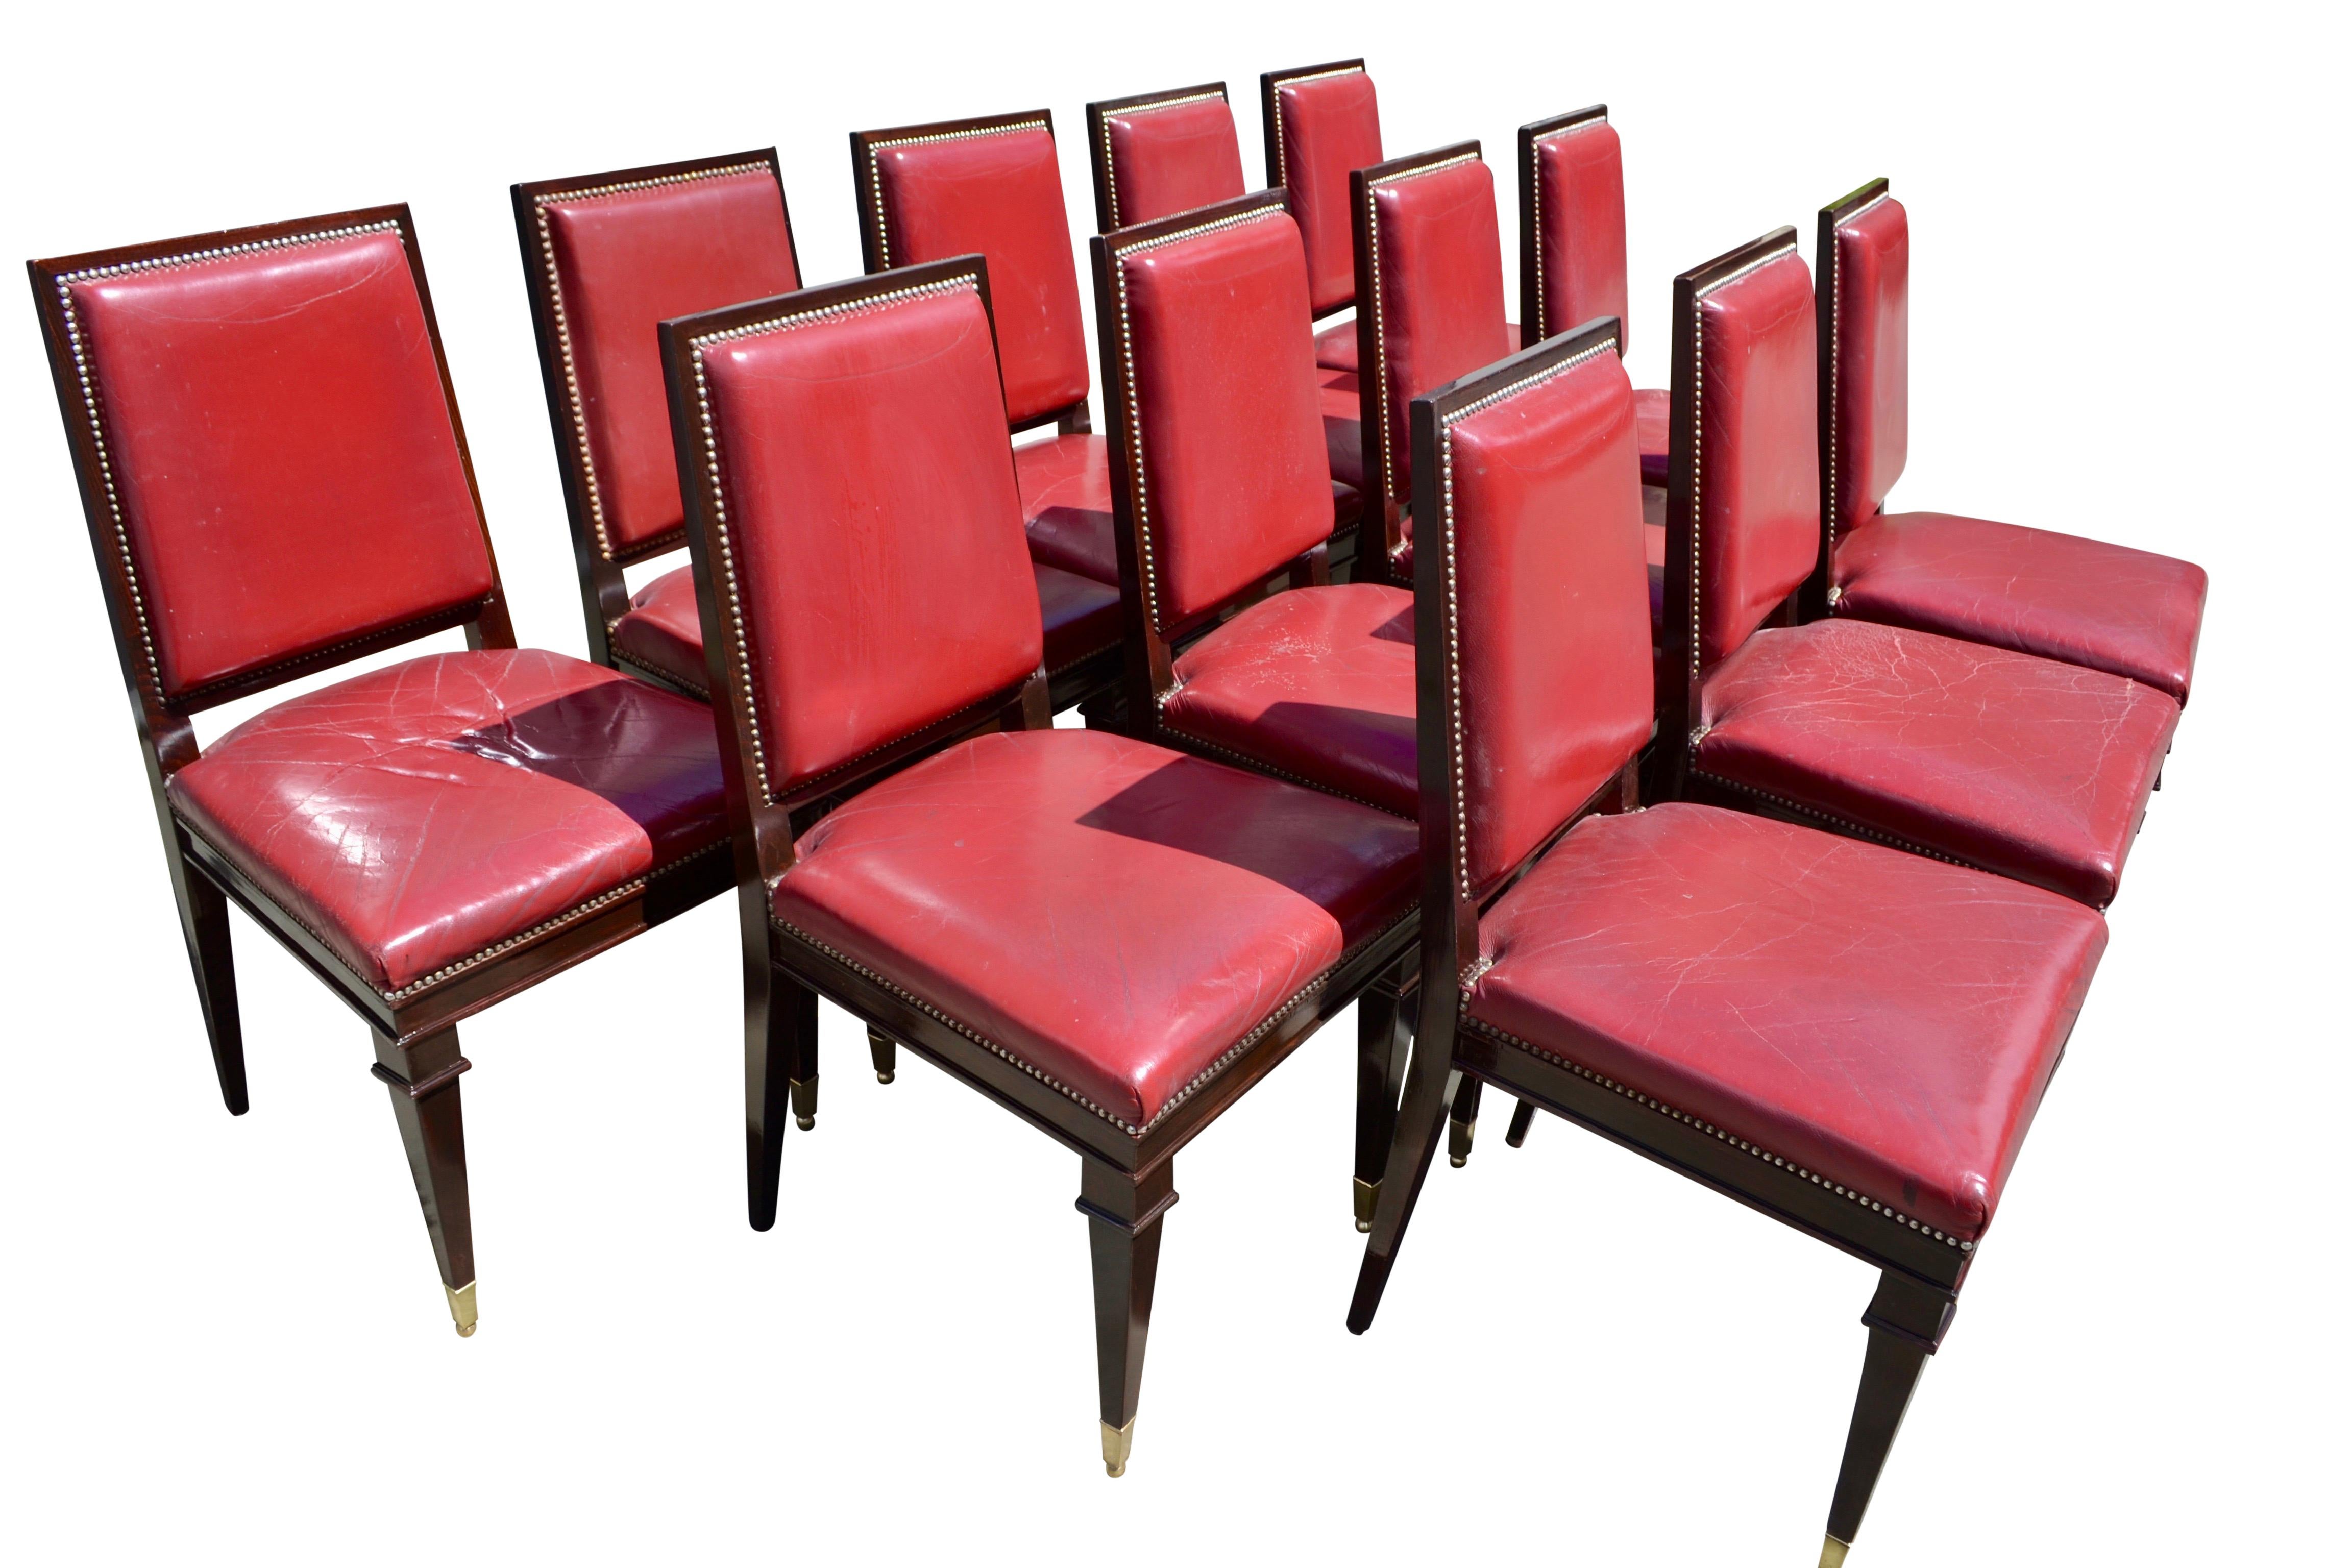 Set of 12 Art Deco Mahogany Framed Red Leather Chairs For Sale 2